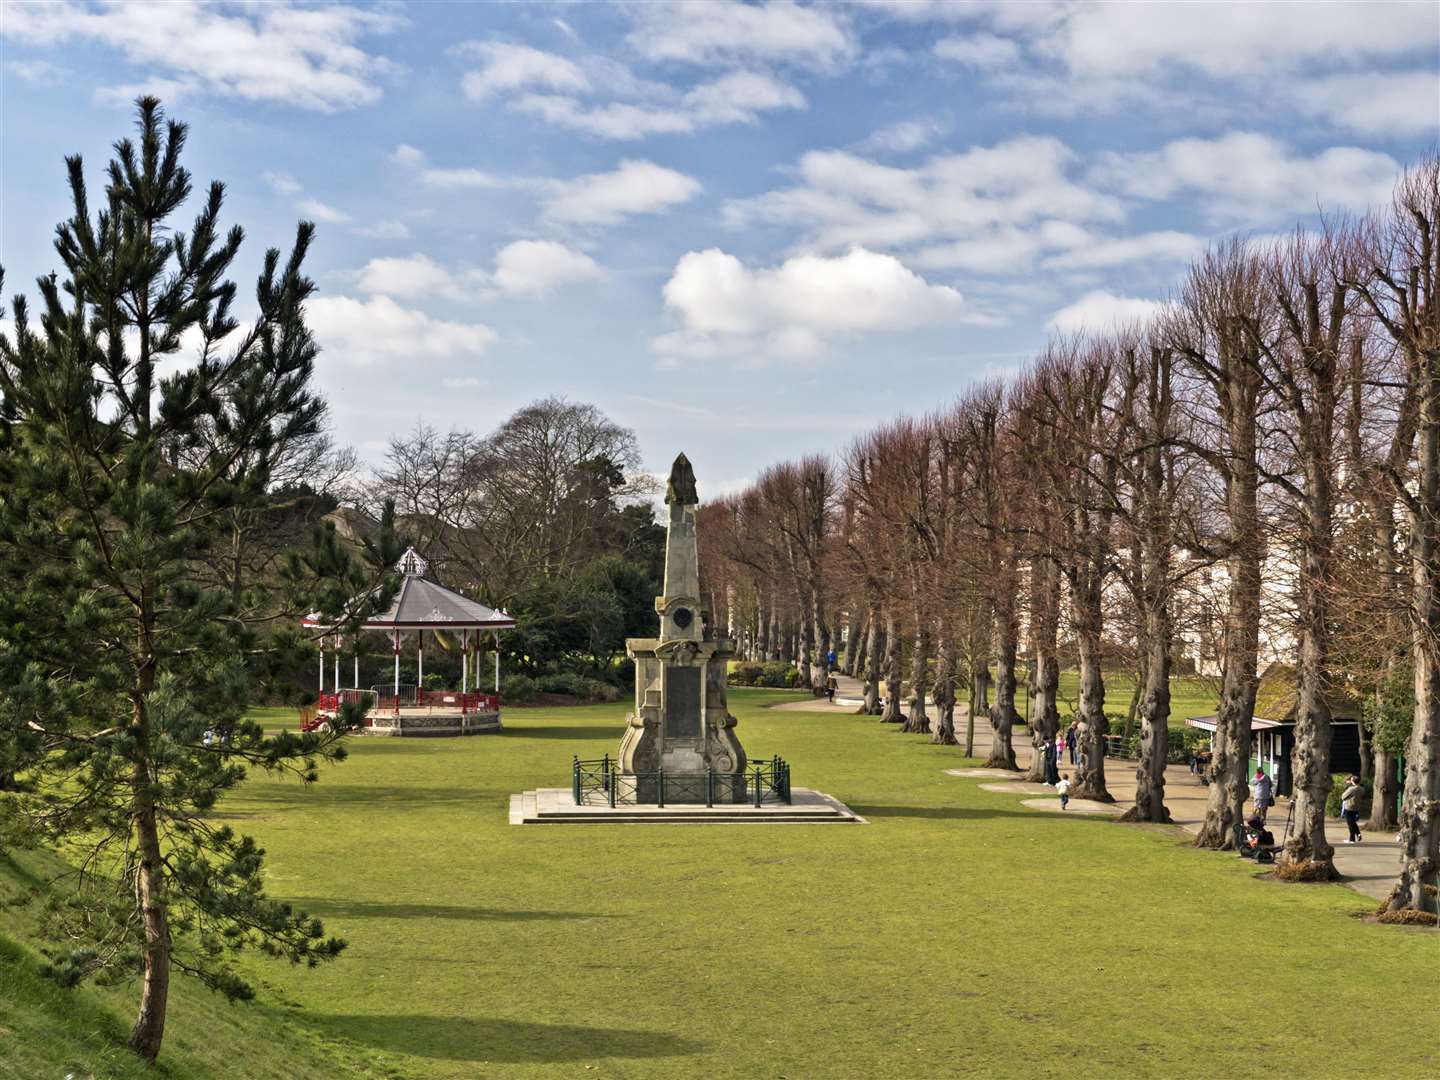 The Normandy Food Tour is coming to the Dane John Gardens in Canterbury on May 2